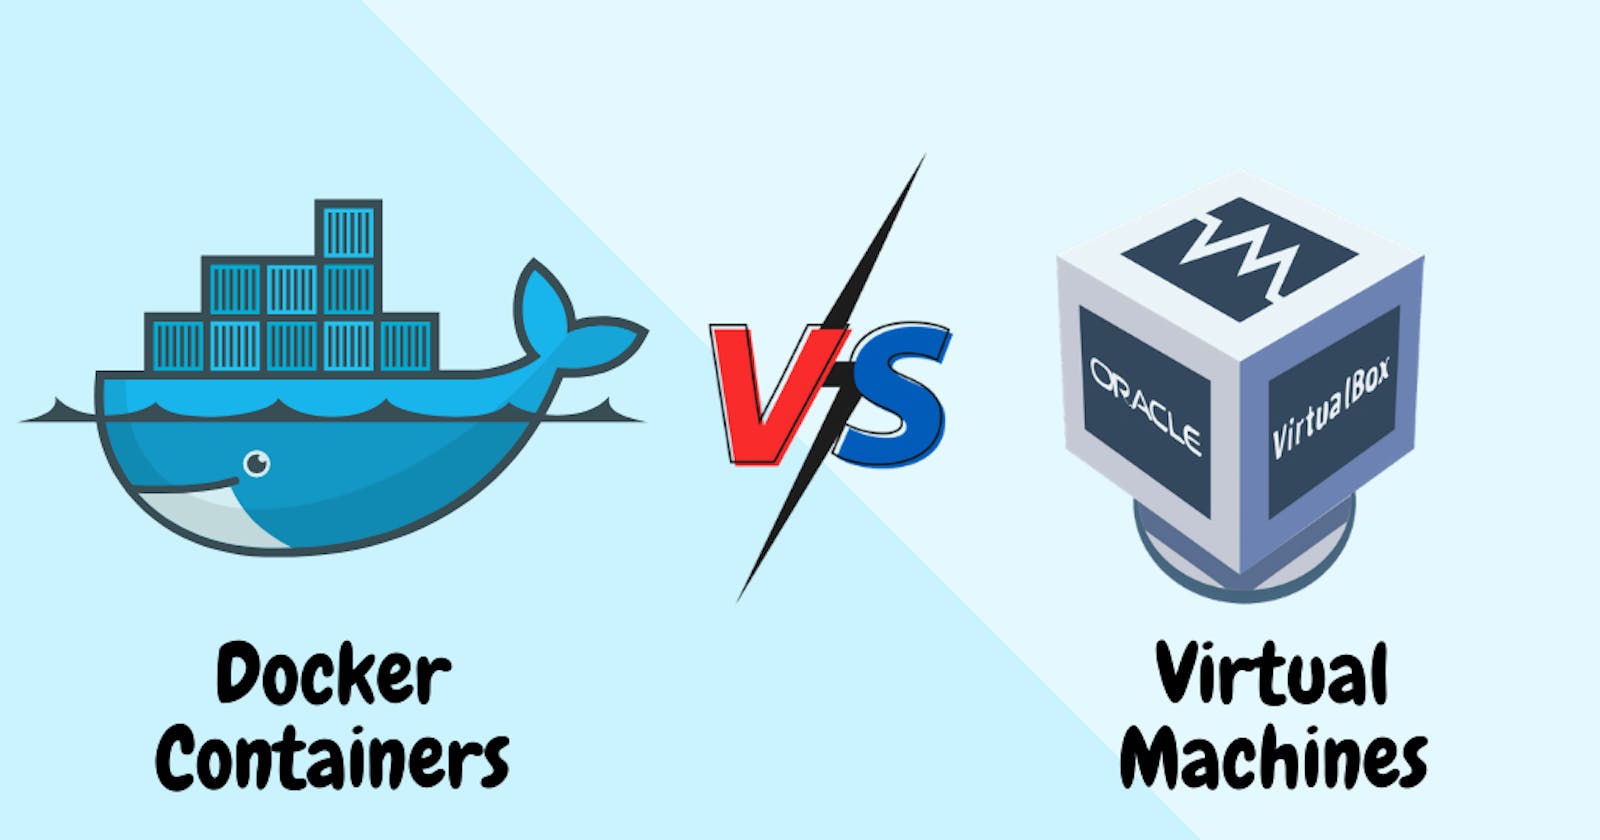 Docker Containers vs Virtual Machines